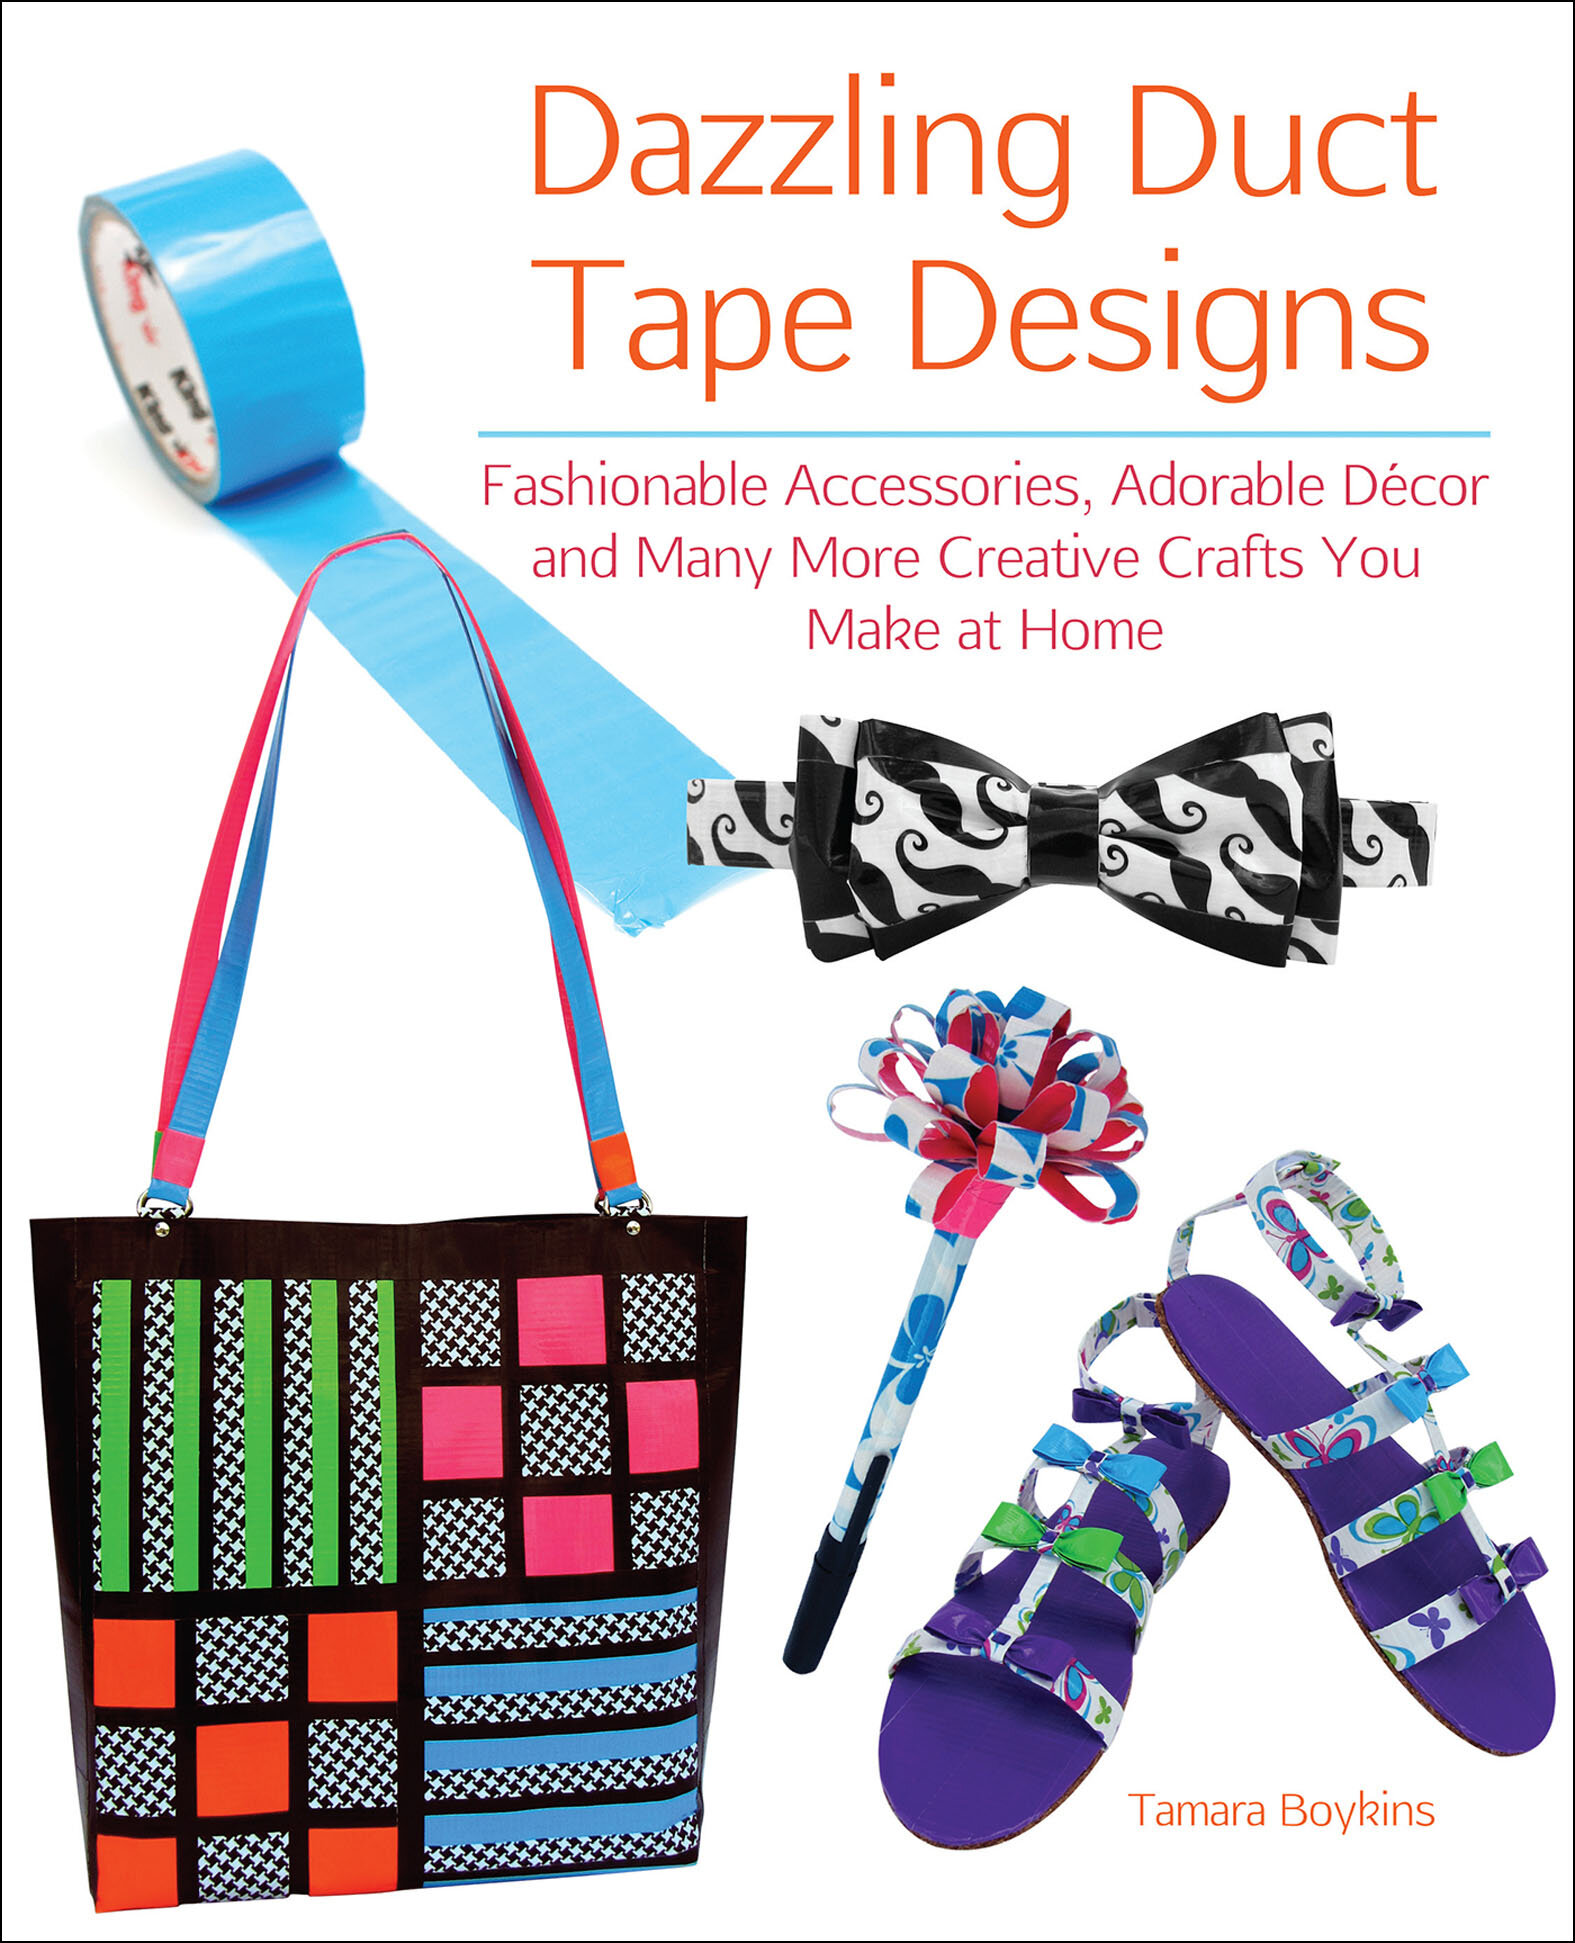 Dazzling Duct Tape Designs: Fashionable Accessories, Adorable Décor, and Many More Creative Crafts You Make At Home [Book]